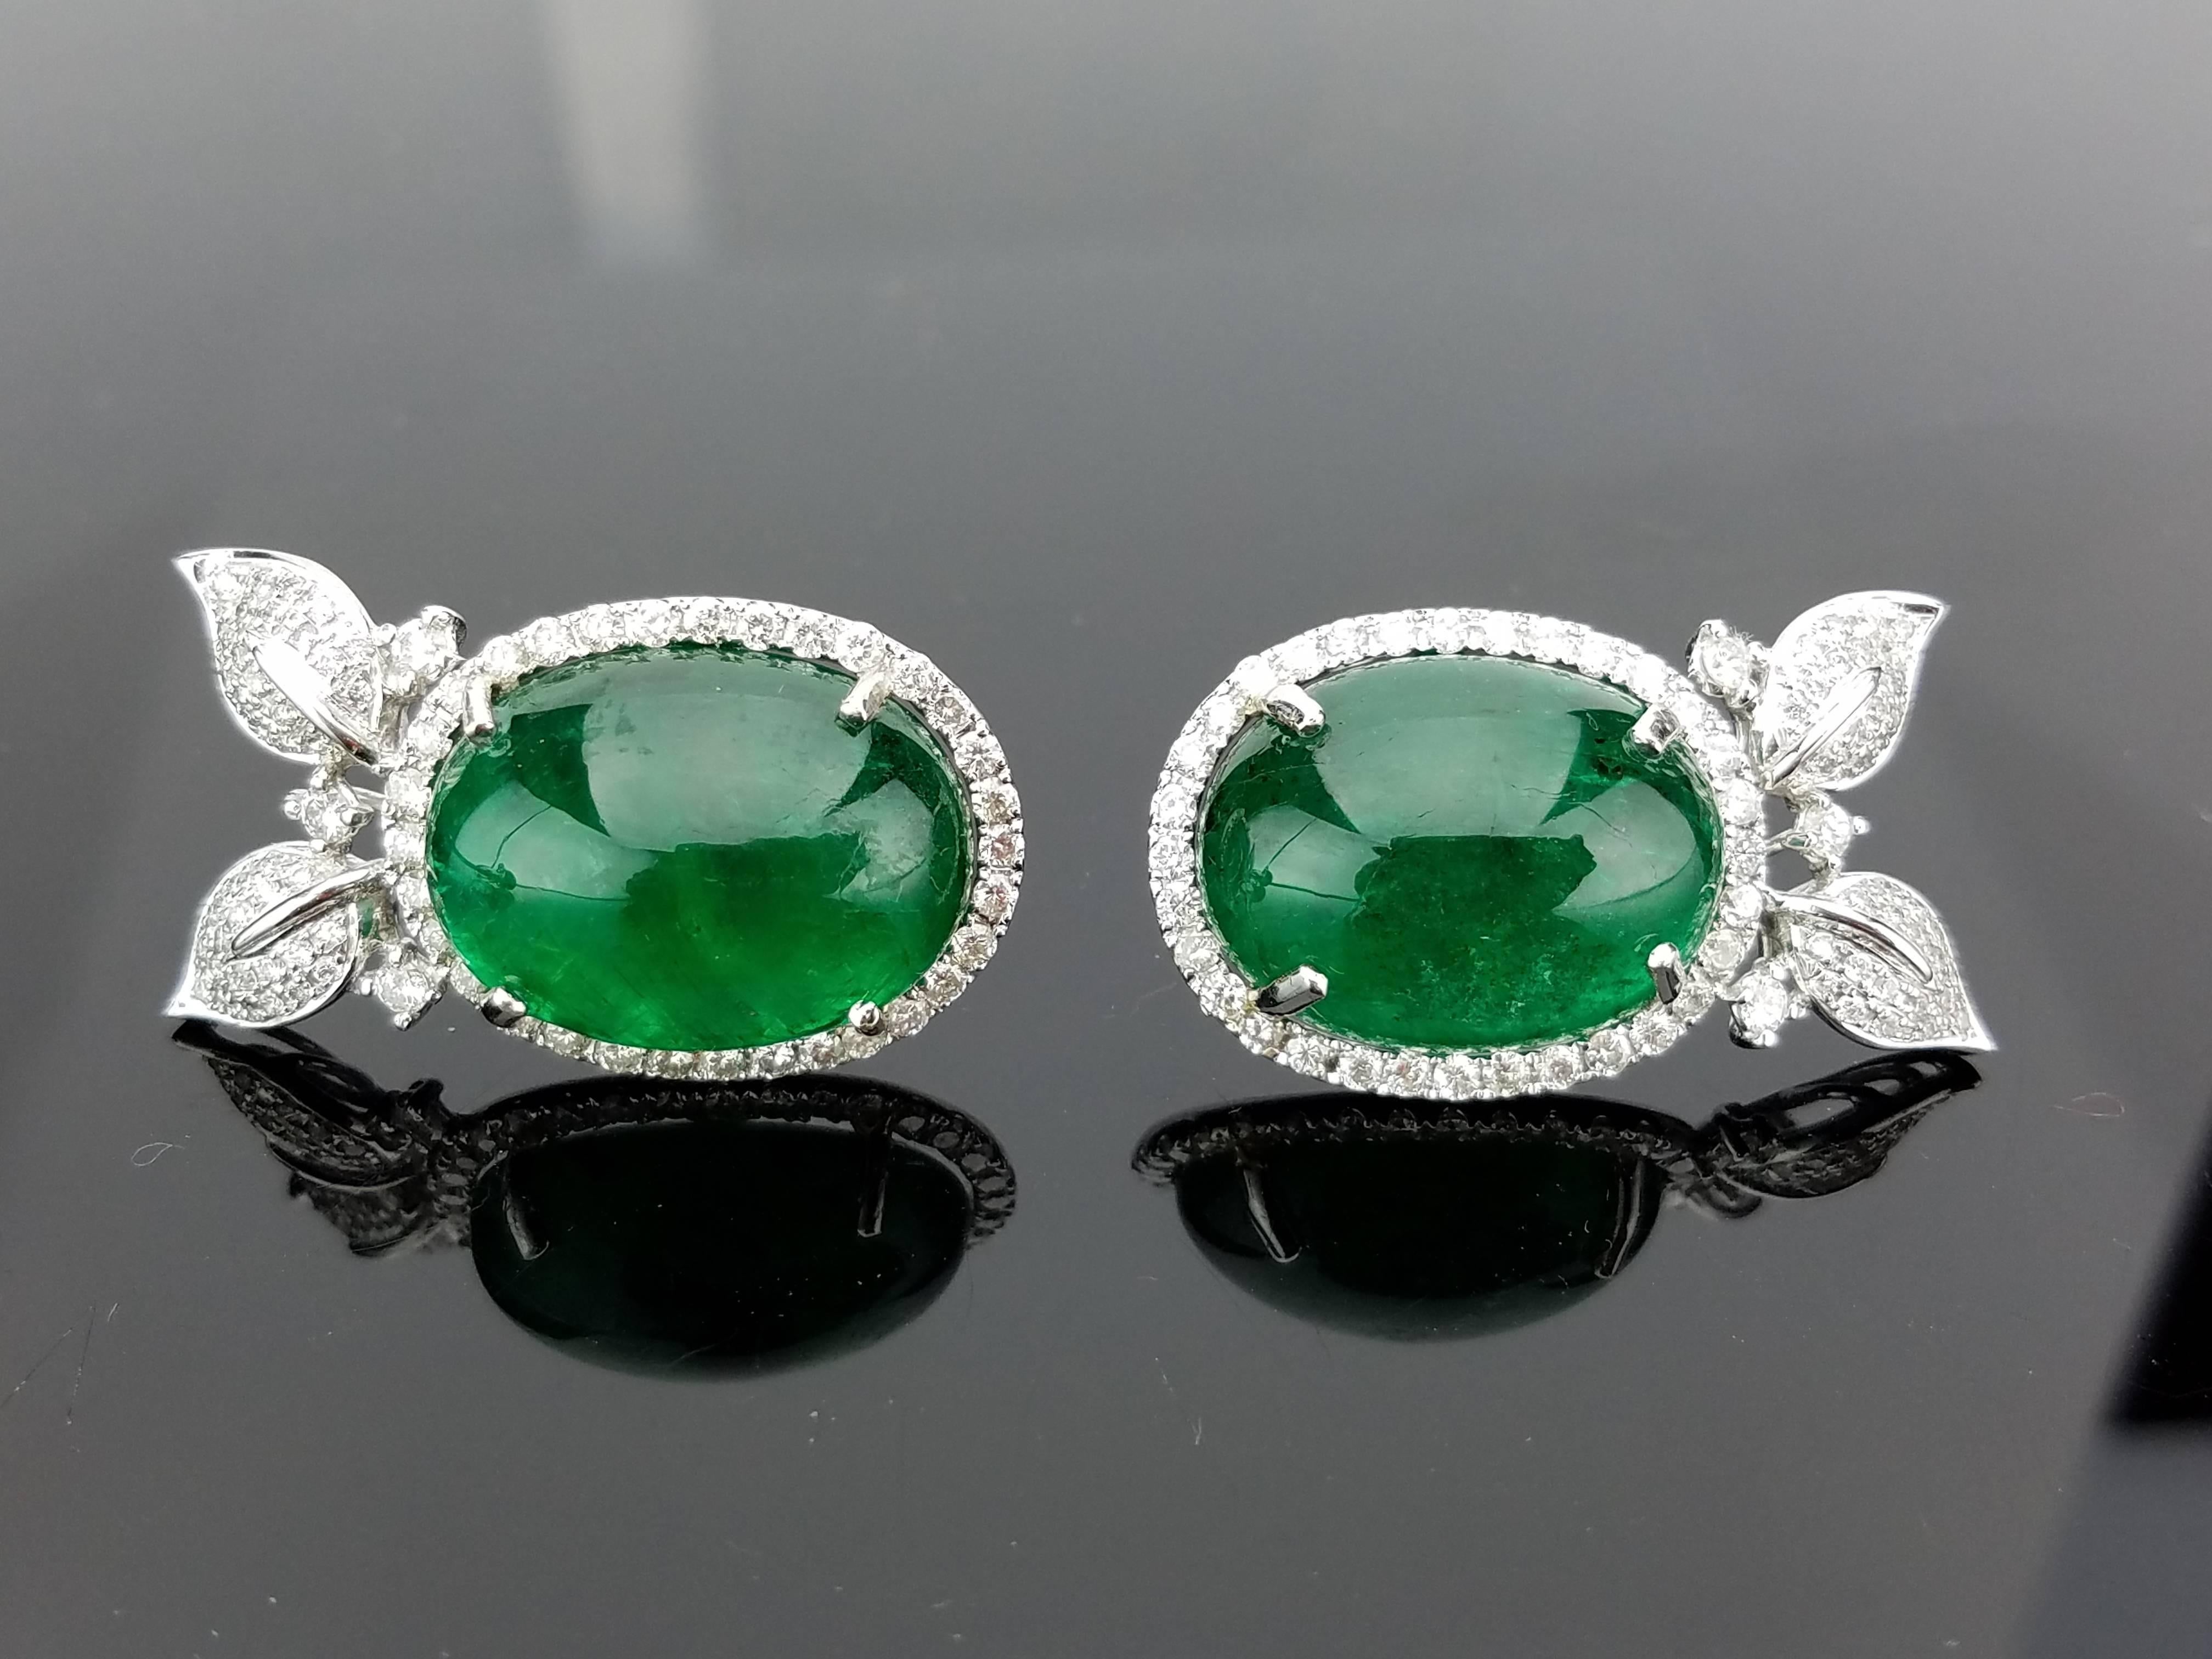 Oval Cut Emerald Cabochon and Diamond Floral Ring and Earring Suite